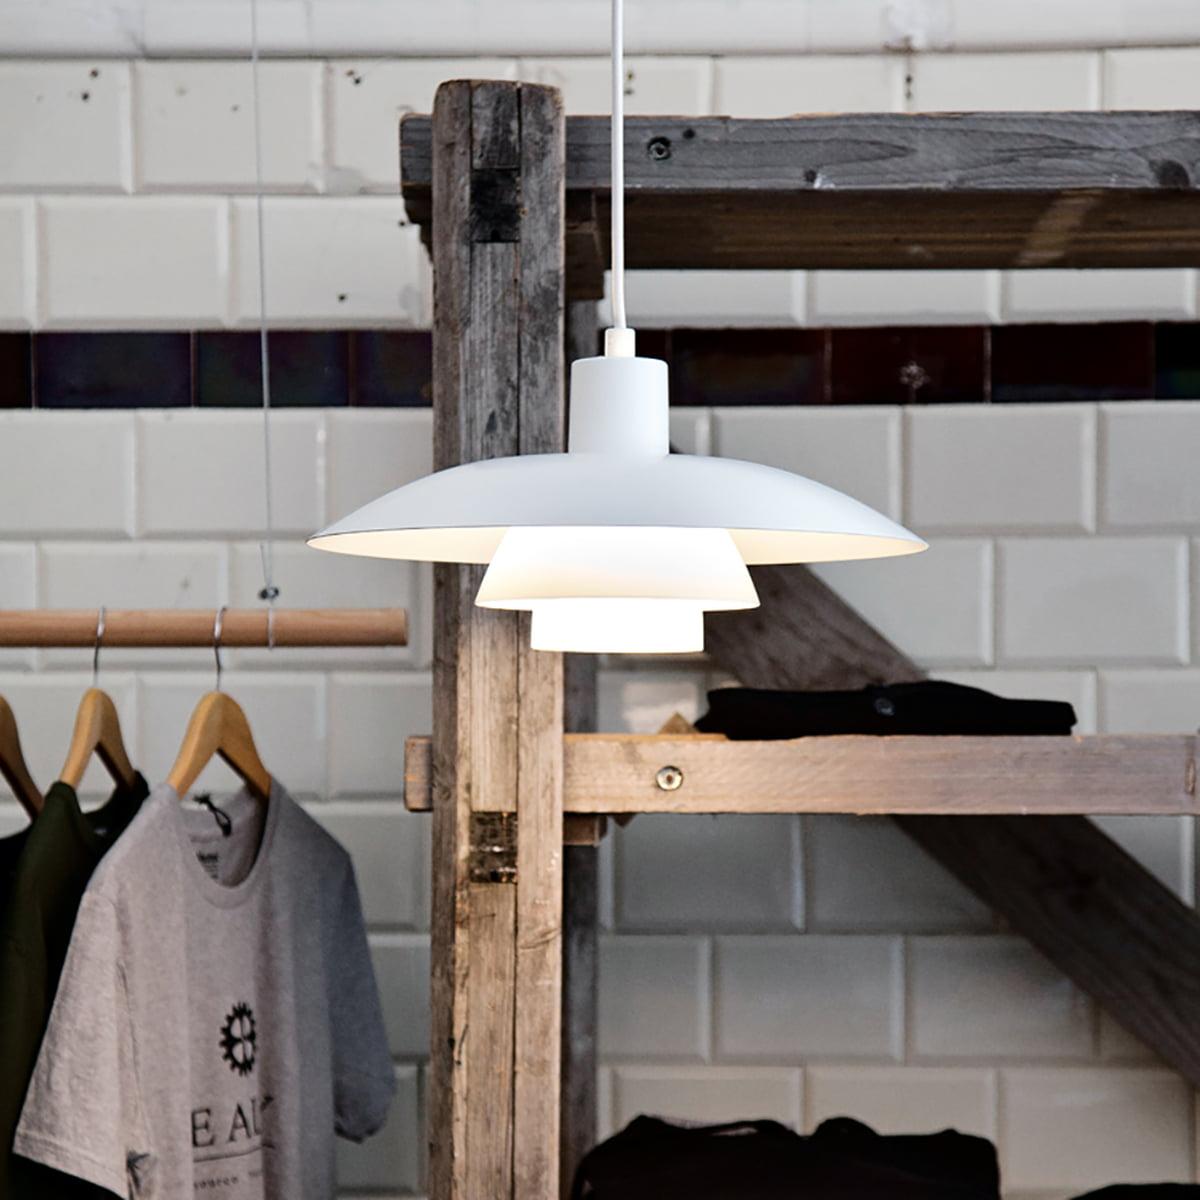 Louis Poulsen, large metal pendant light by Poul Henningsen.
Measures: Width x height x length (mm)
400 x 200 x 400, 1.1 kg
Material: White lacquered aluminium. Canopy: Yes Cord length: 3 m. Cord type: White fabric.